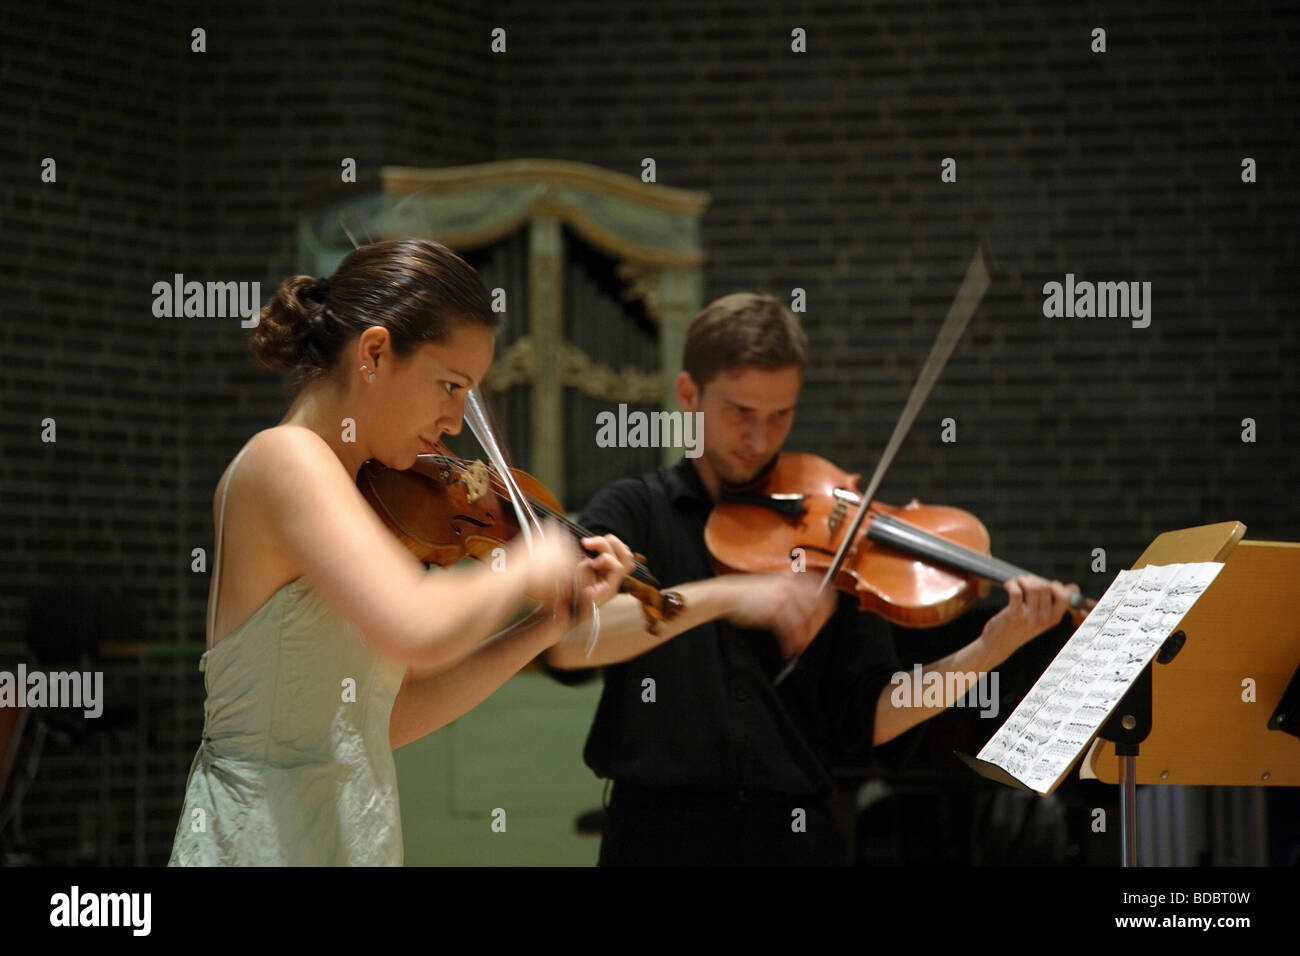 Students of University of Music in Duesseldorf during a concert, Germany Stock Photo